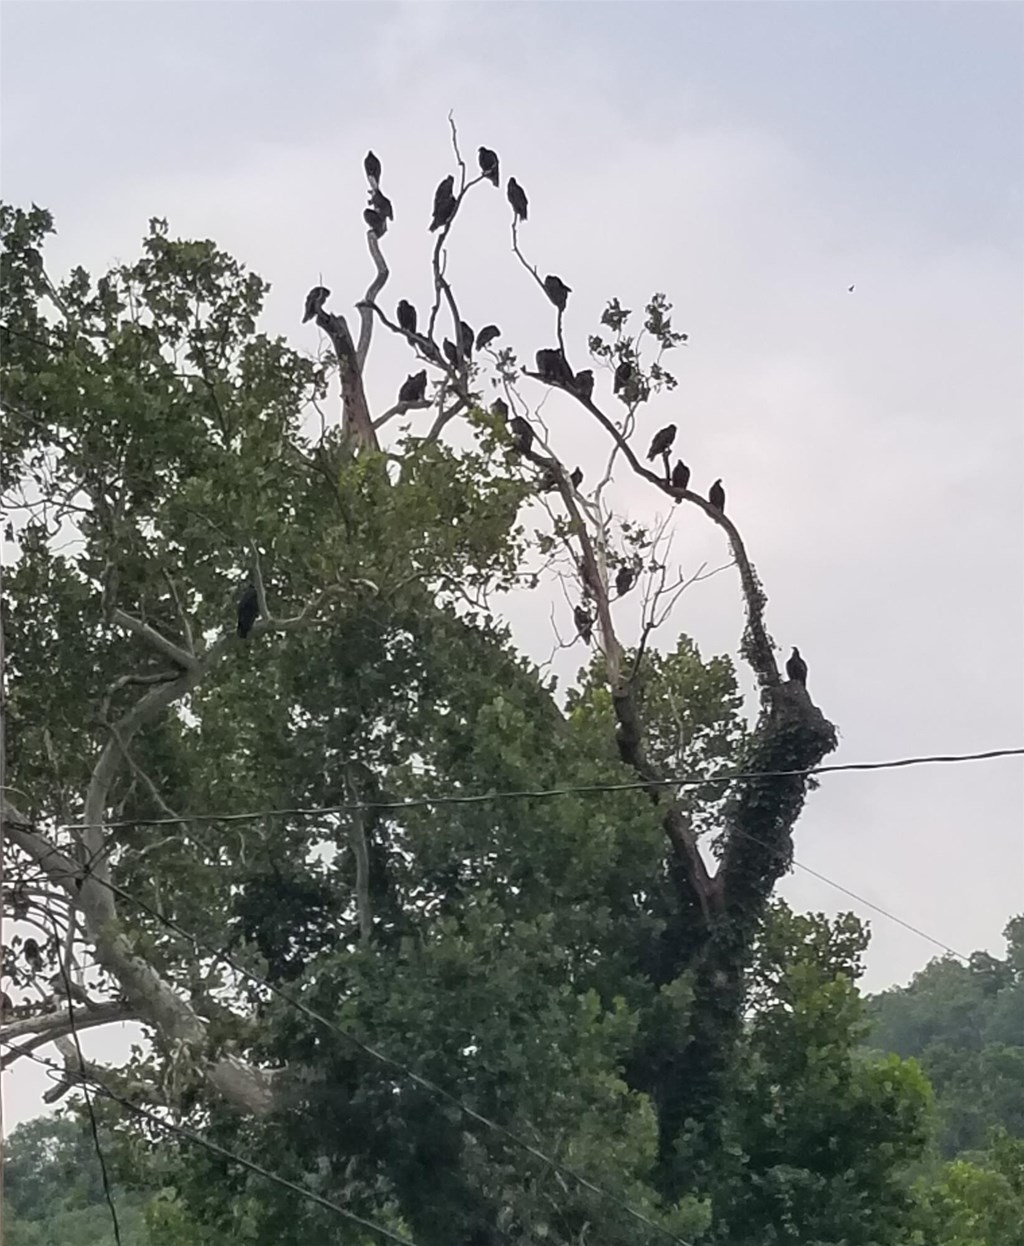 Committee of vultures perched on a tree